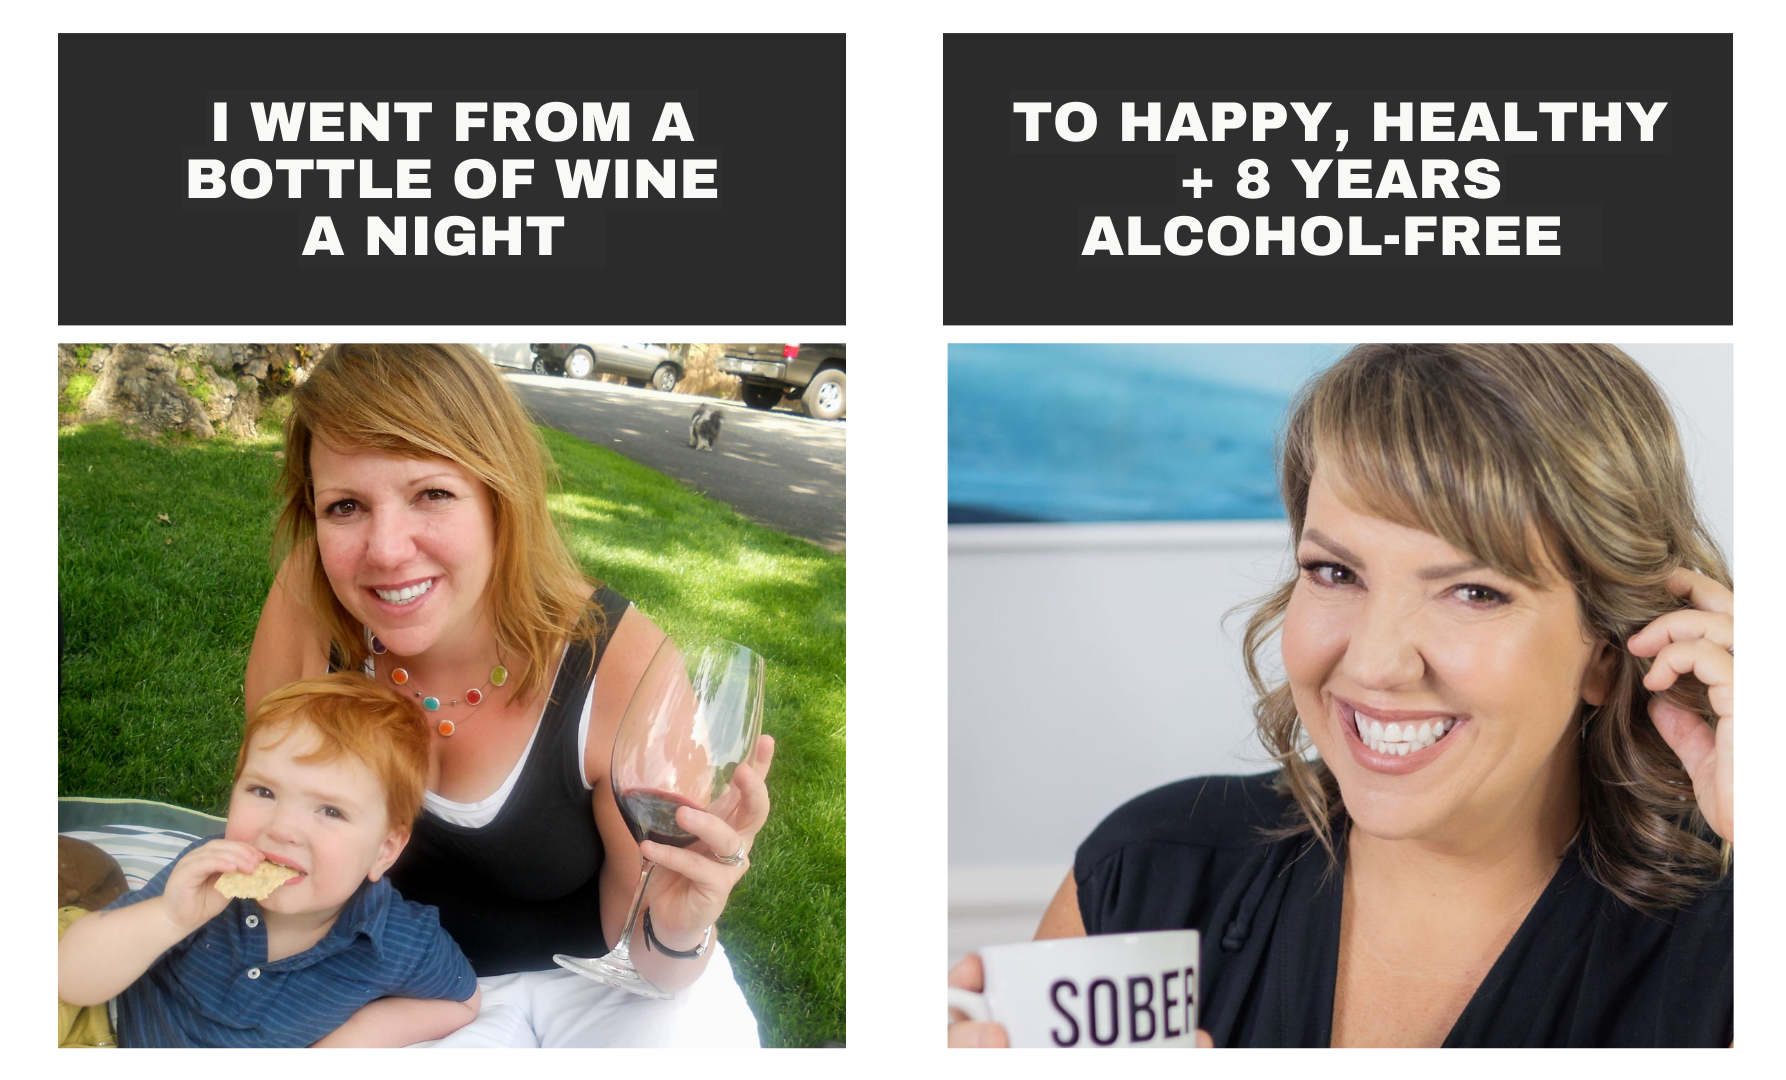 I went from a bottle of wine a night to 8 years alcohol-free. Here's how I did it!